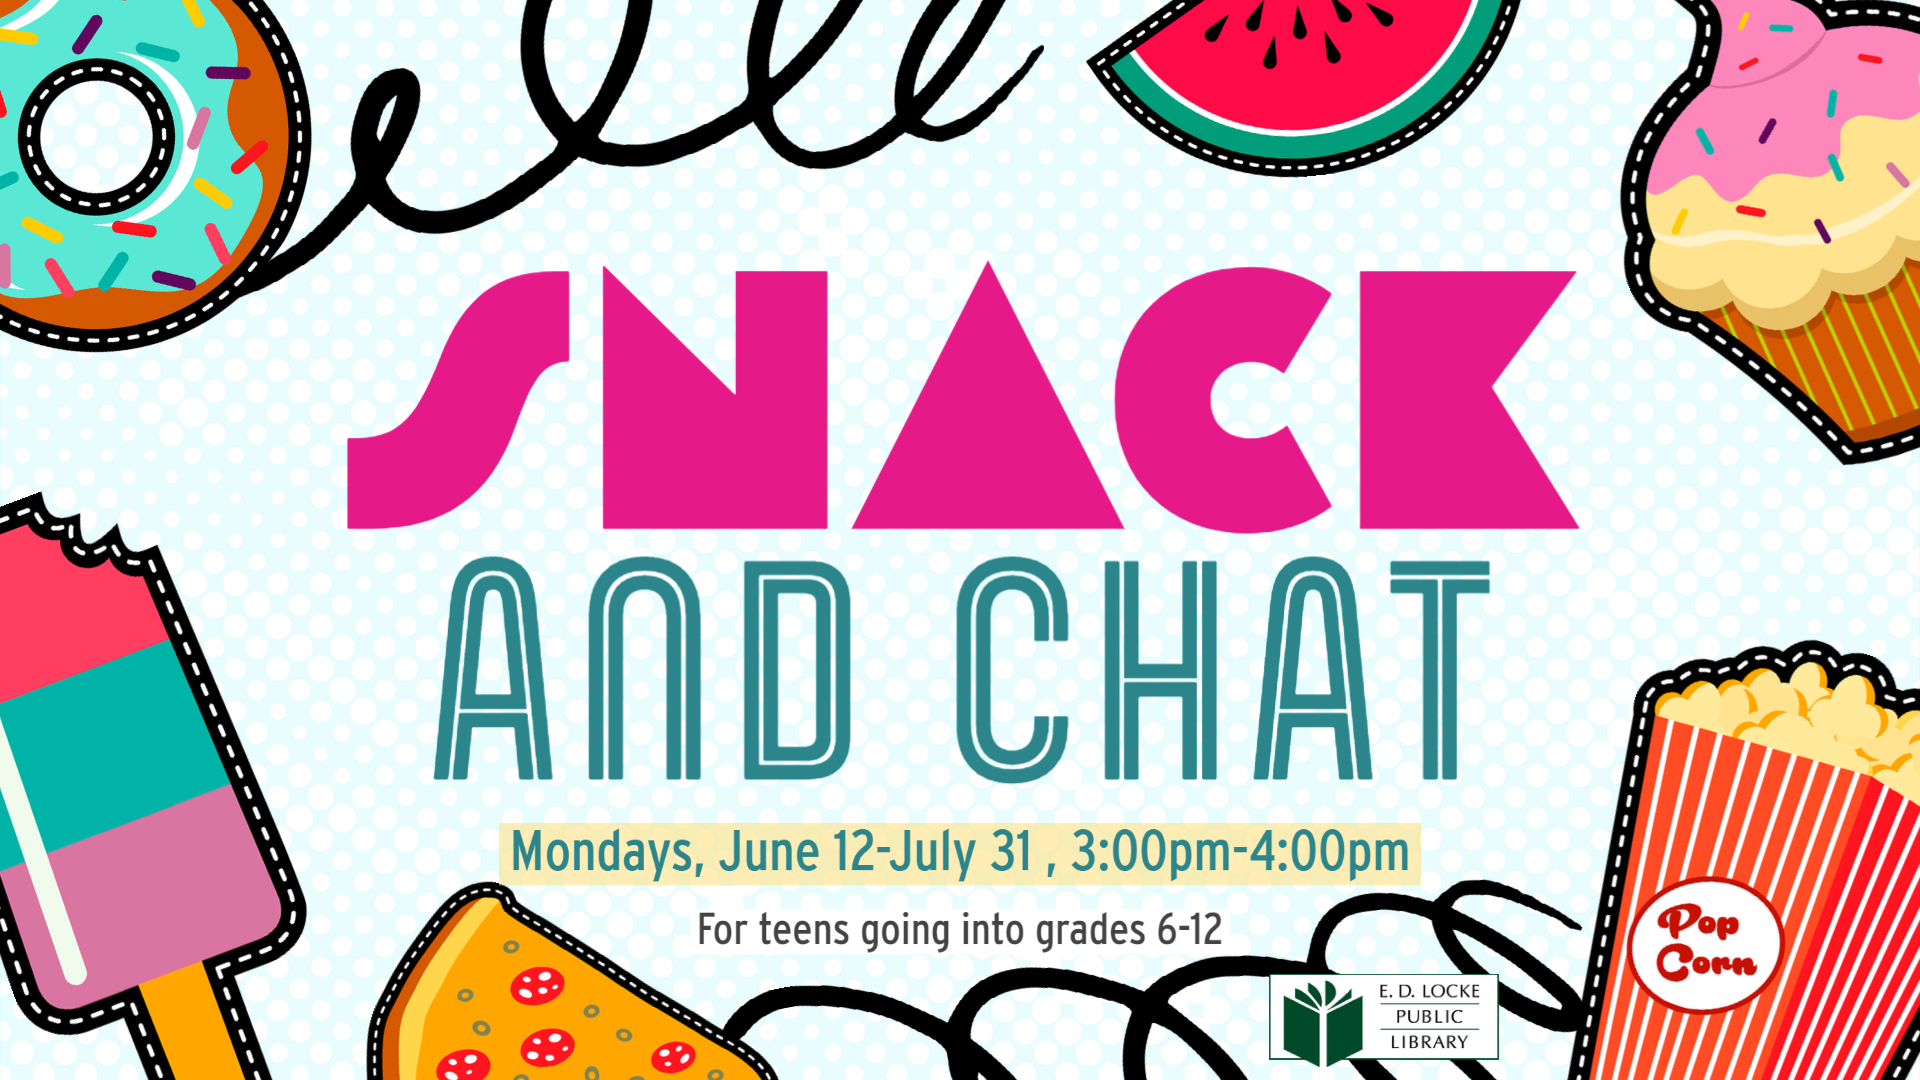 Snack and Chat flyer includes image of foods like popcorn, a popsicle, watermelon, and a donut. 